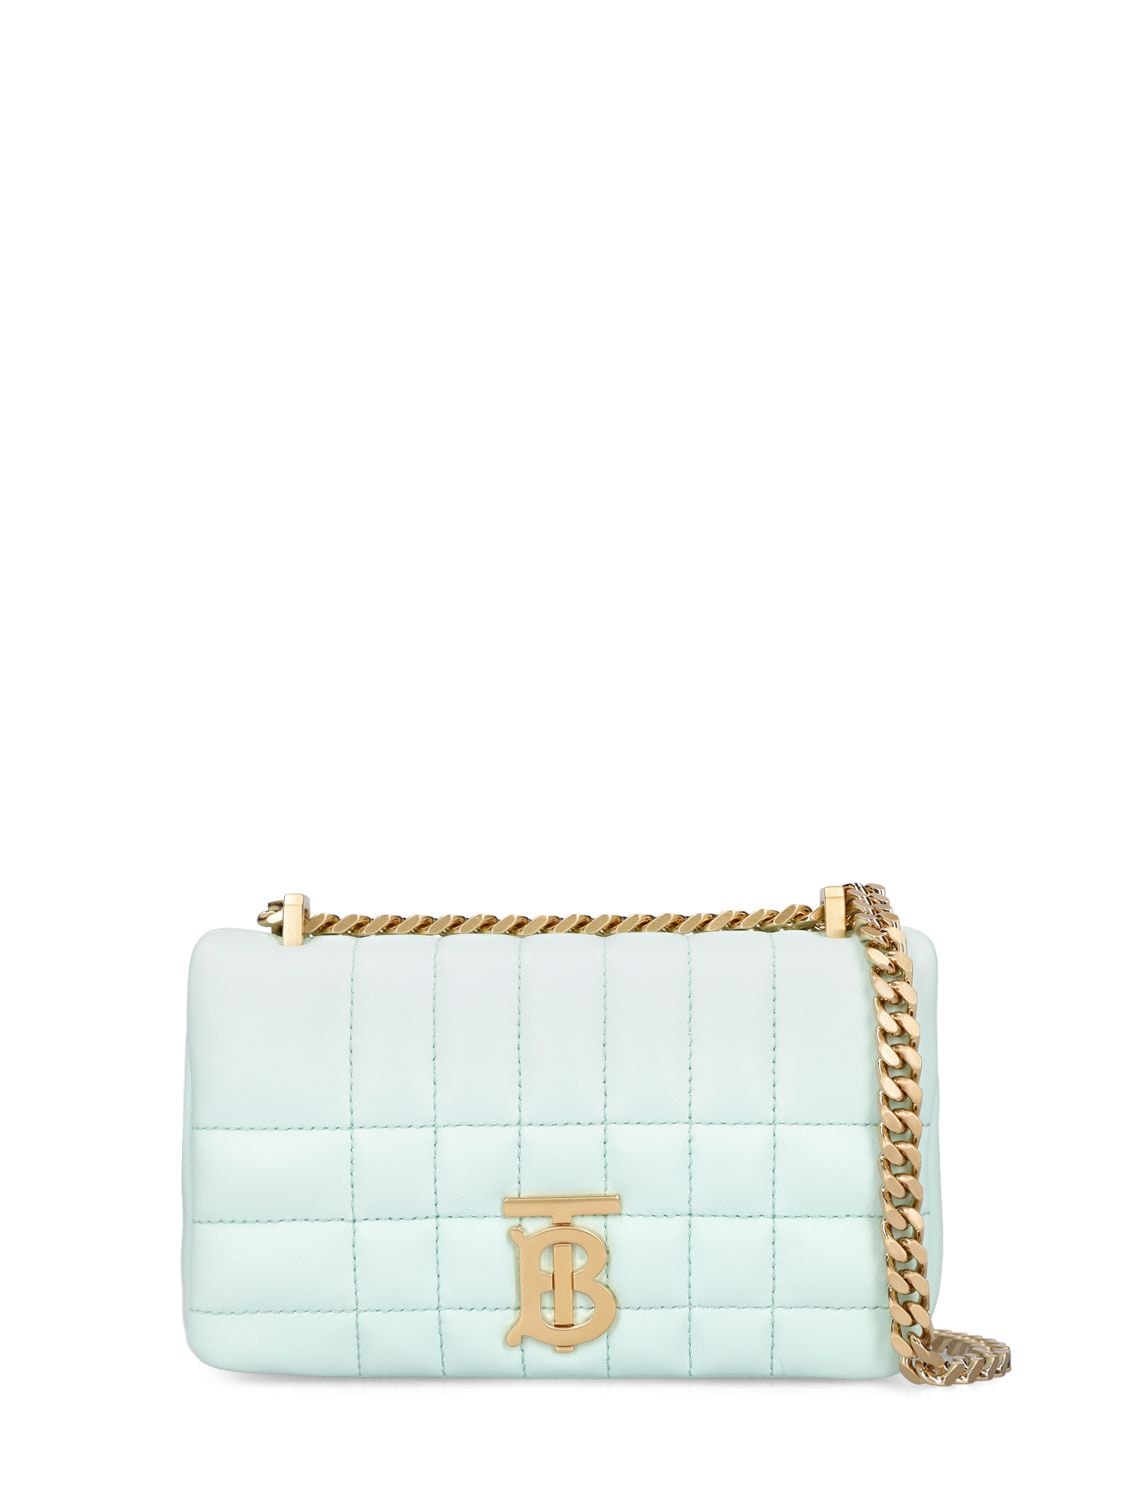 Burberry Mini Lola Quilted Leather Shoulder Bag In Cool Mint